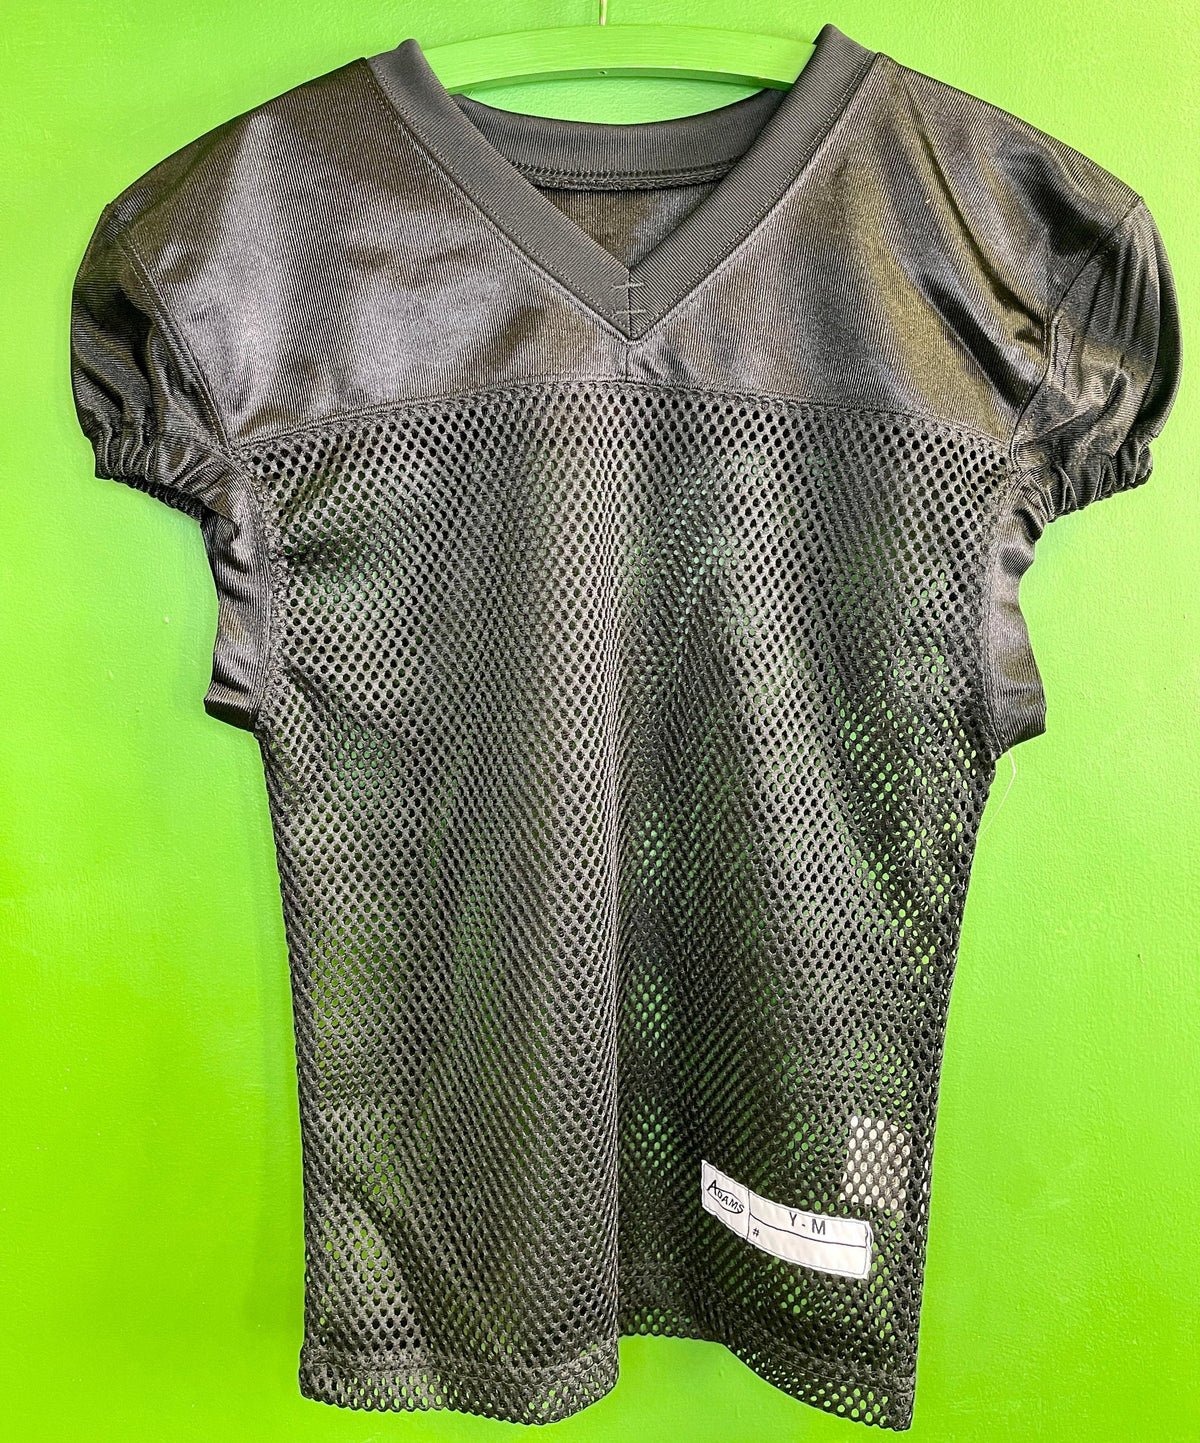 American Football Practise Scrimmage Jersey Youth Medium 10-12